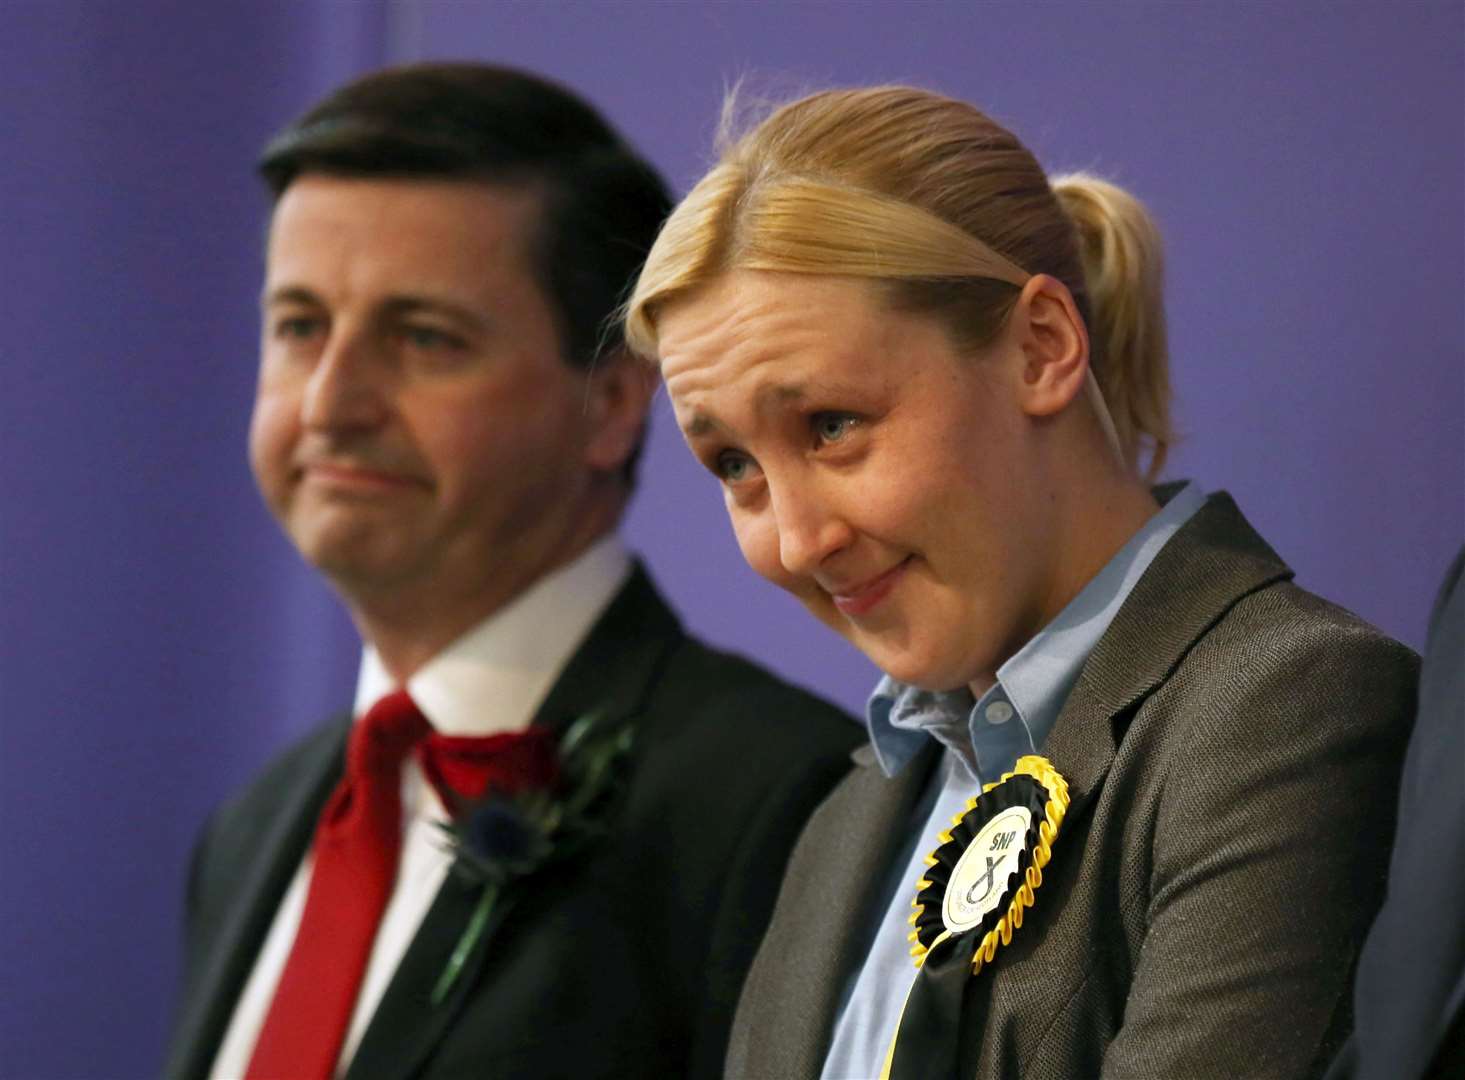 Mr Alexander was dramatically ousted by Mhairi Black in the 2015 general election (David Cheskin/PA)